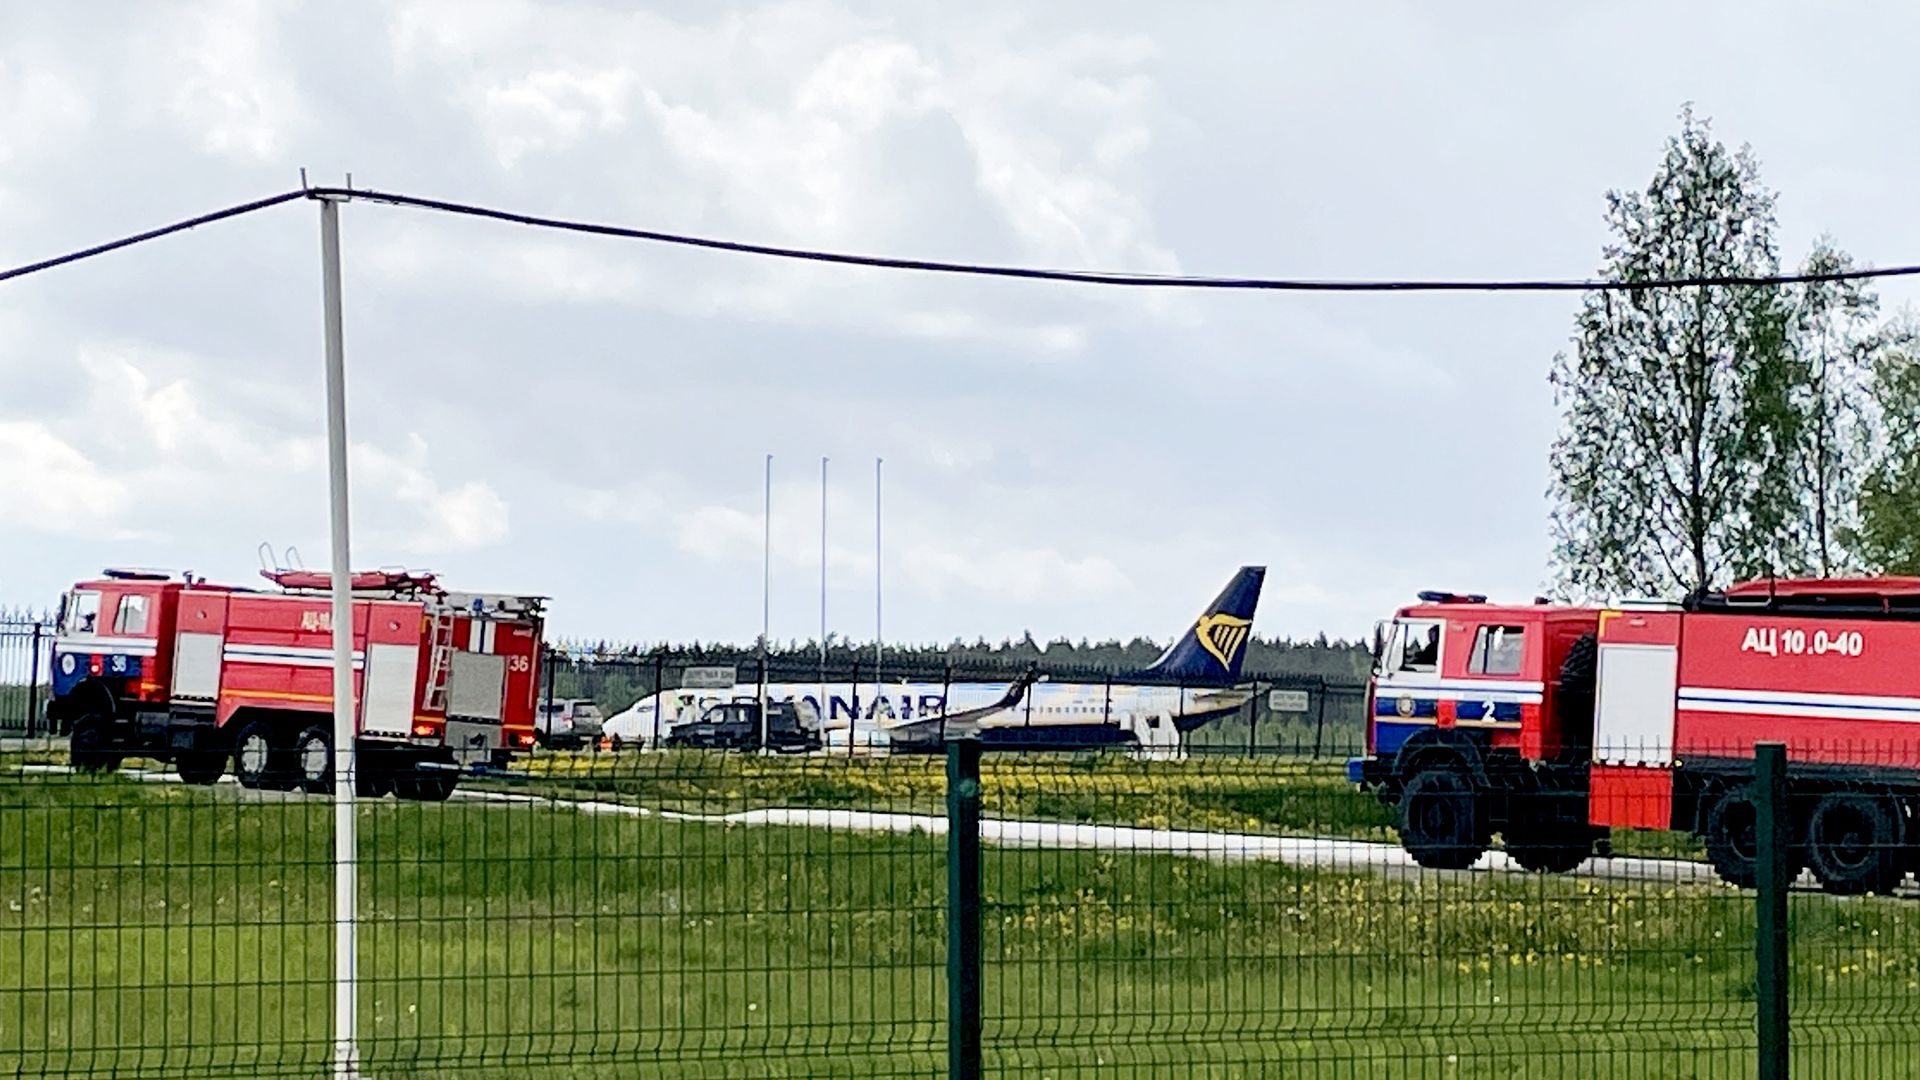 Ryanair flight FR4978 at Minsk International Airport after it made an emergency landing there. Passenger, opposition activist Roman Protasevich, was removed from the aircraft - Credit: AFP via Getty Images